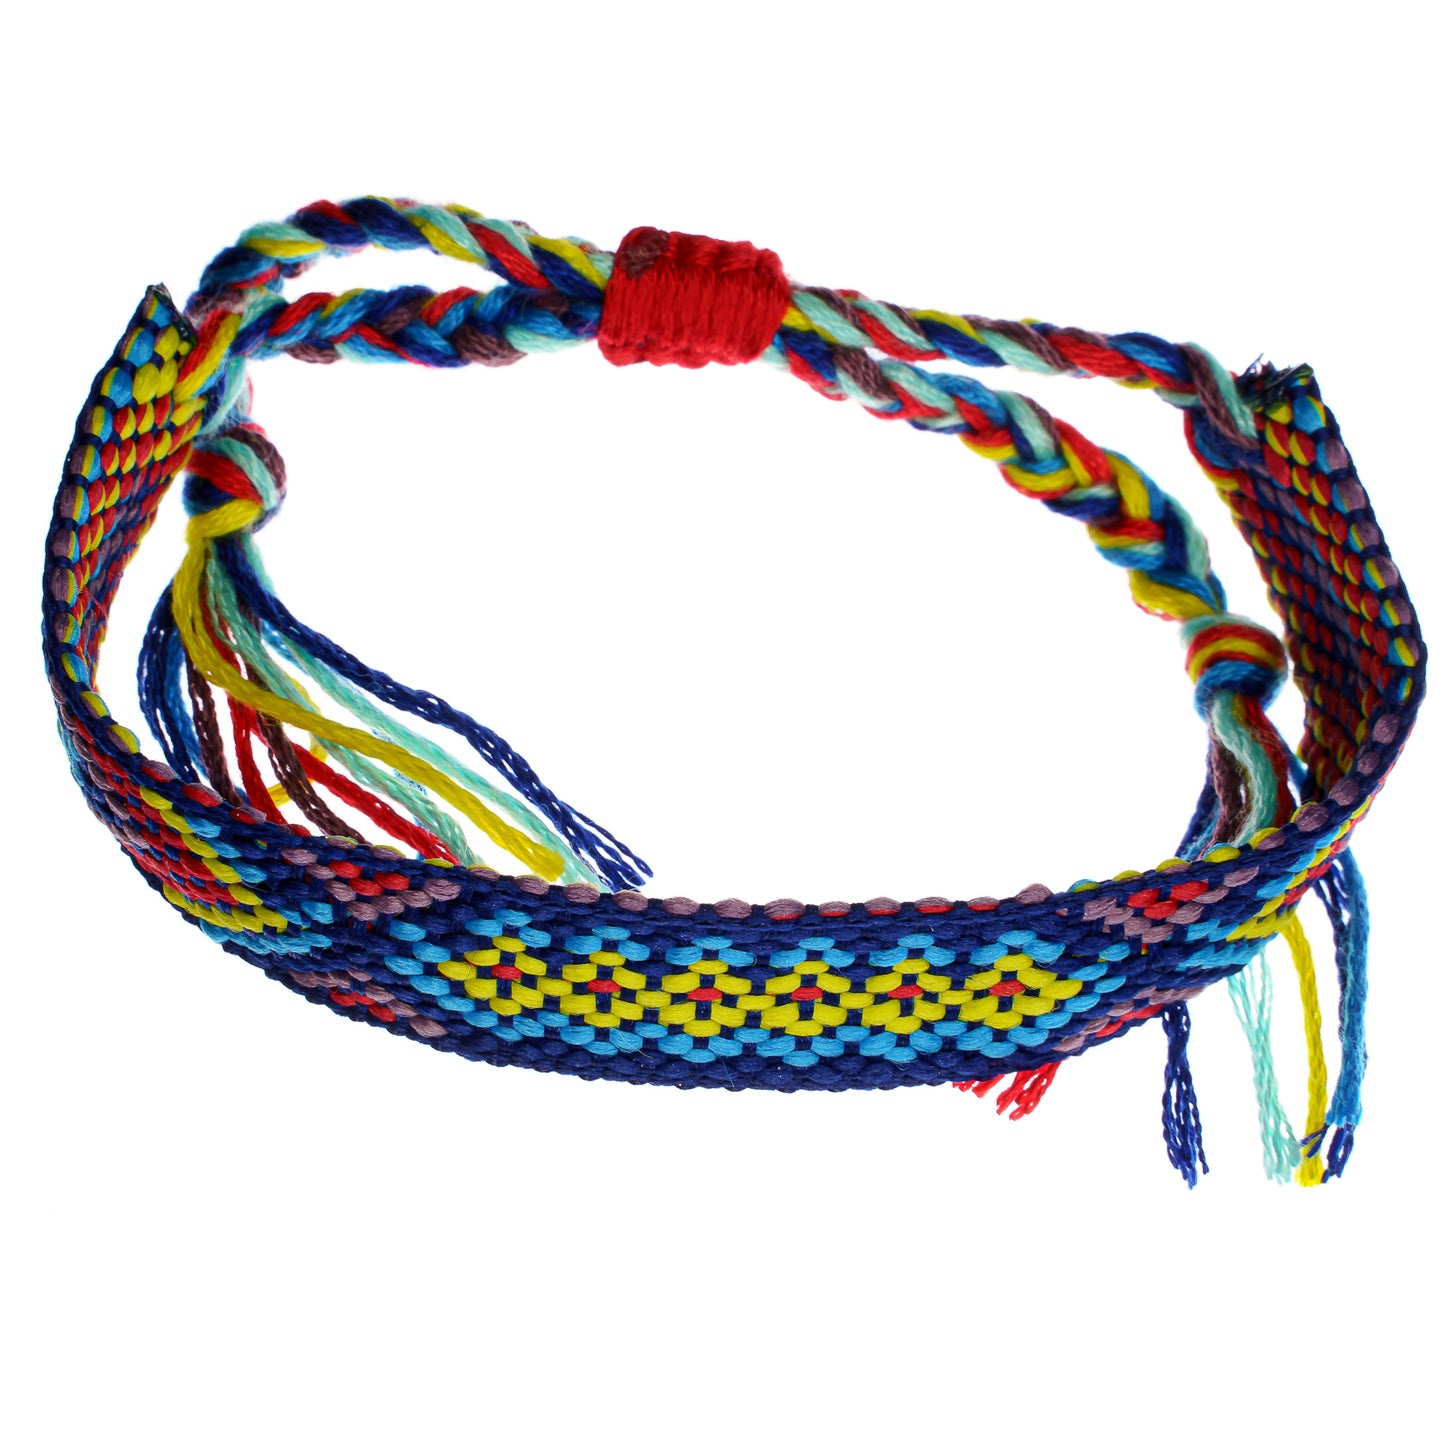 Hippie Braided Colorful Bracelet - NEW Colors